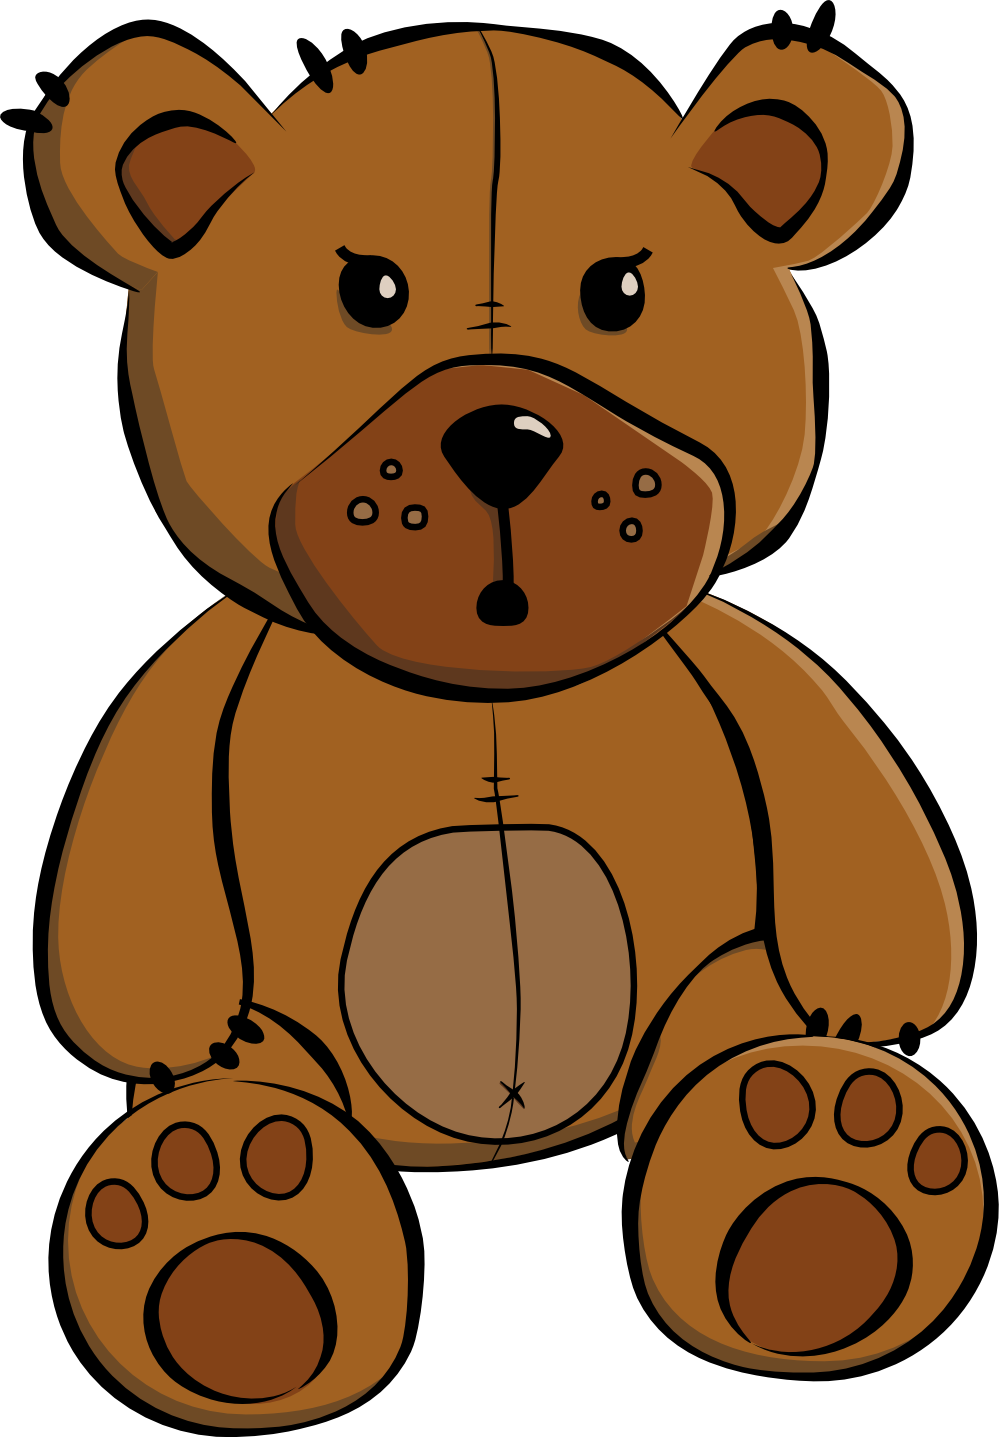 Teddy Bear Outline Clipart   Clipart Panda   Free Clipart Images